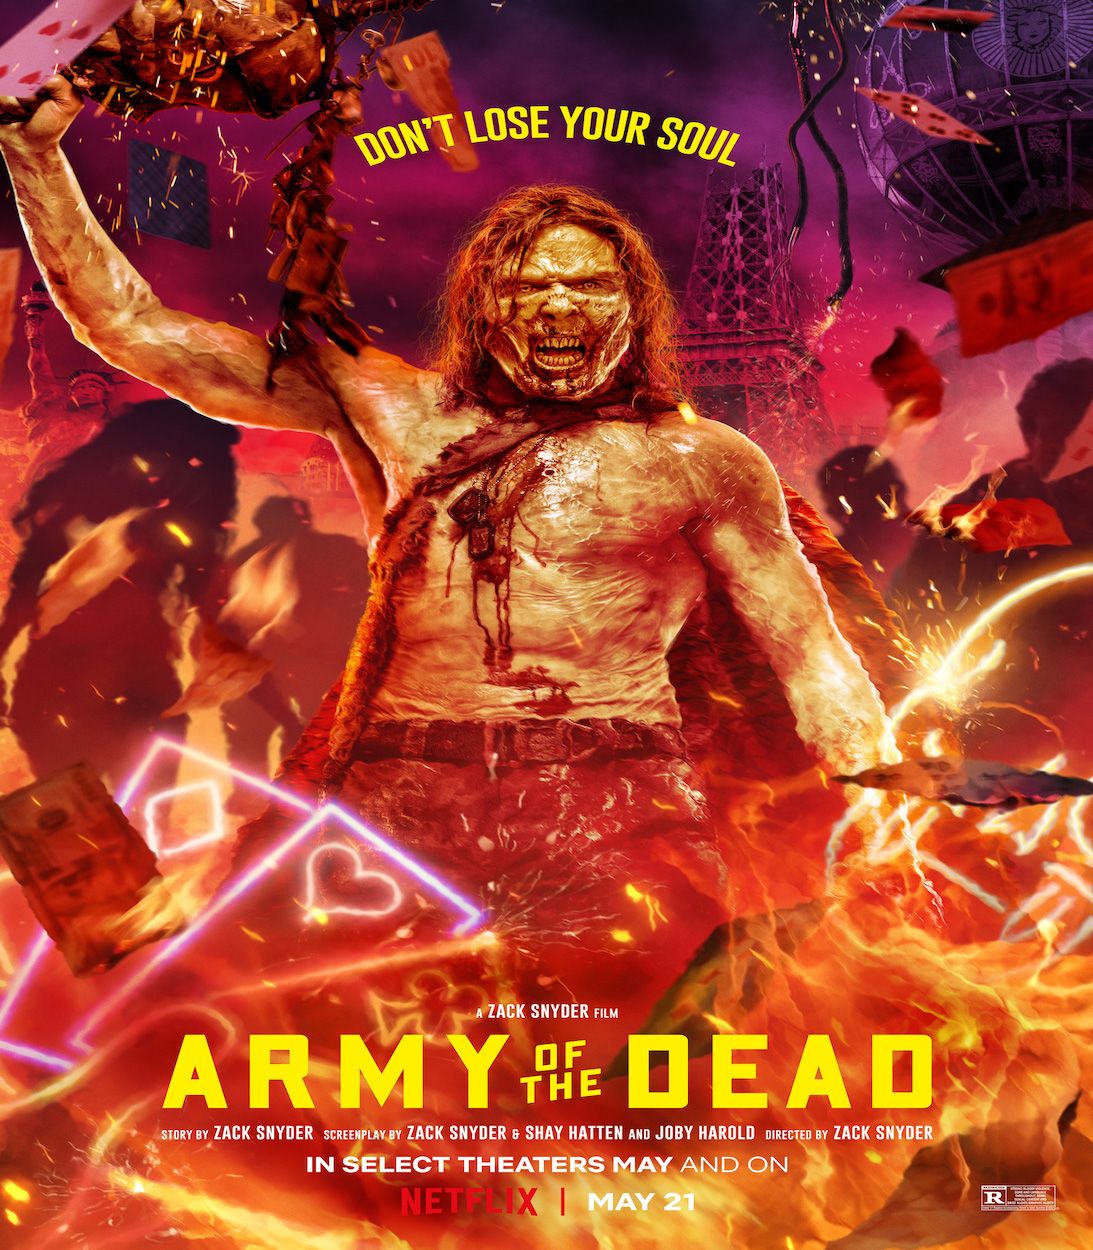 Army of the Dead character poster alpha zombie Zeus